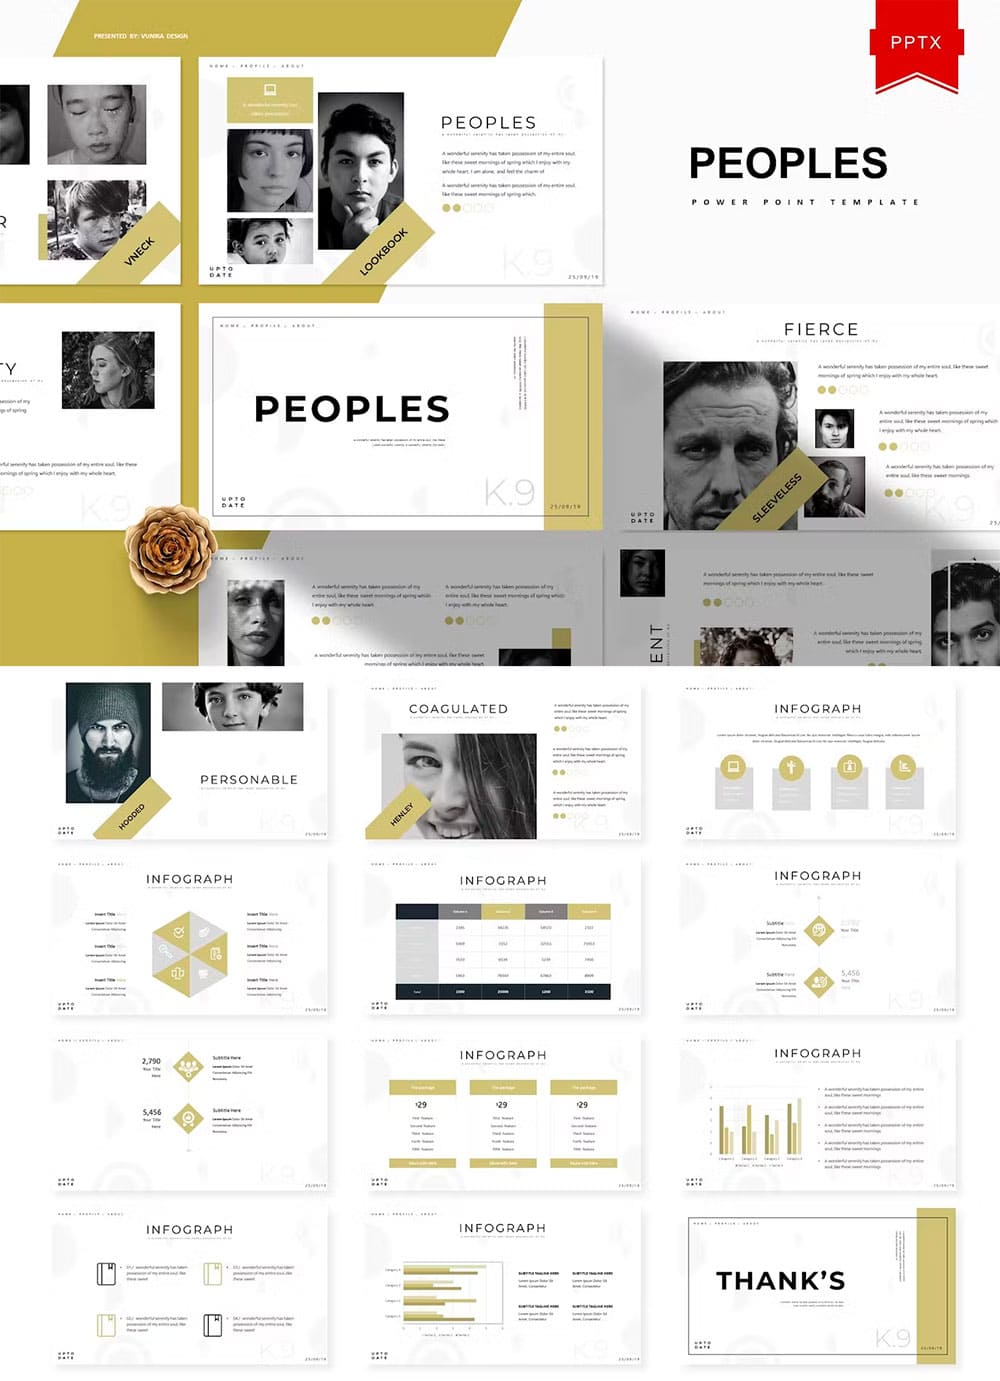 Peoples powerpoint template, picture for pinterest.